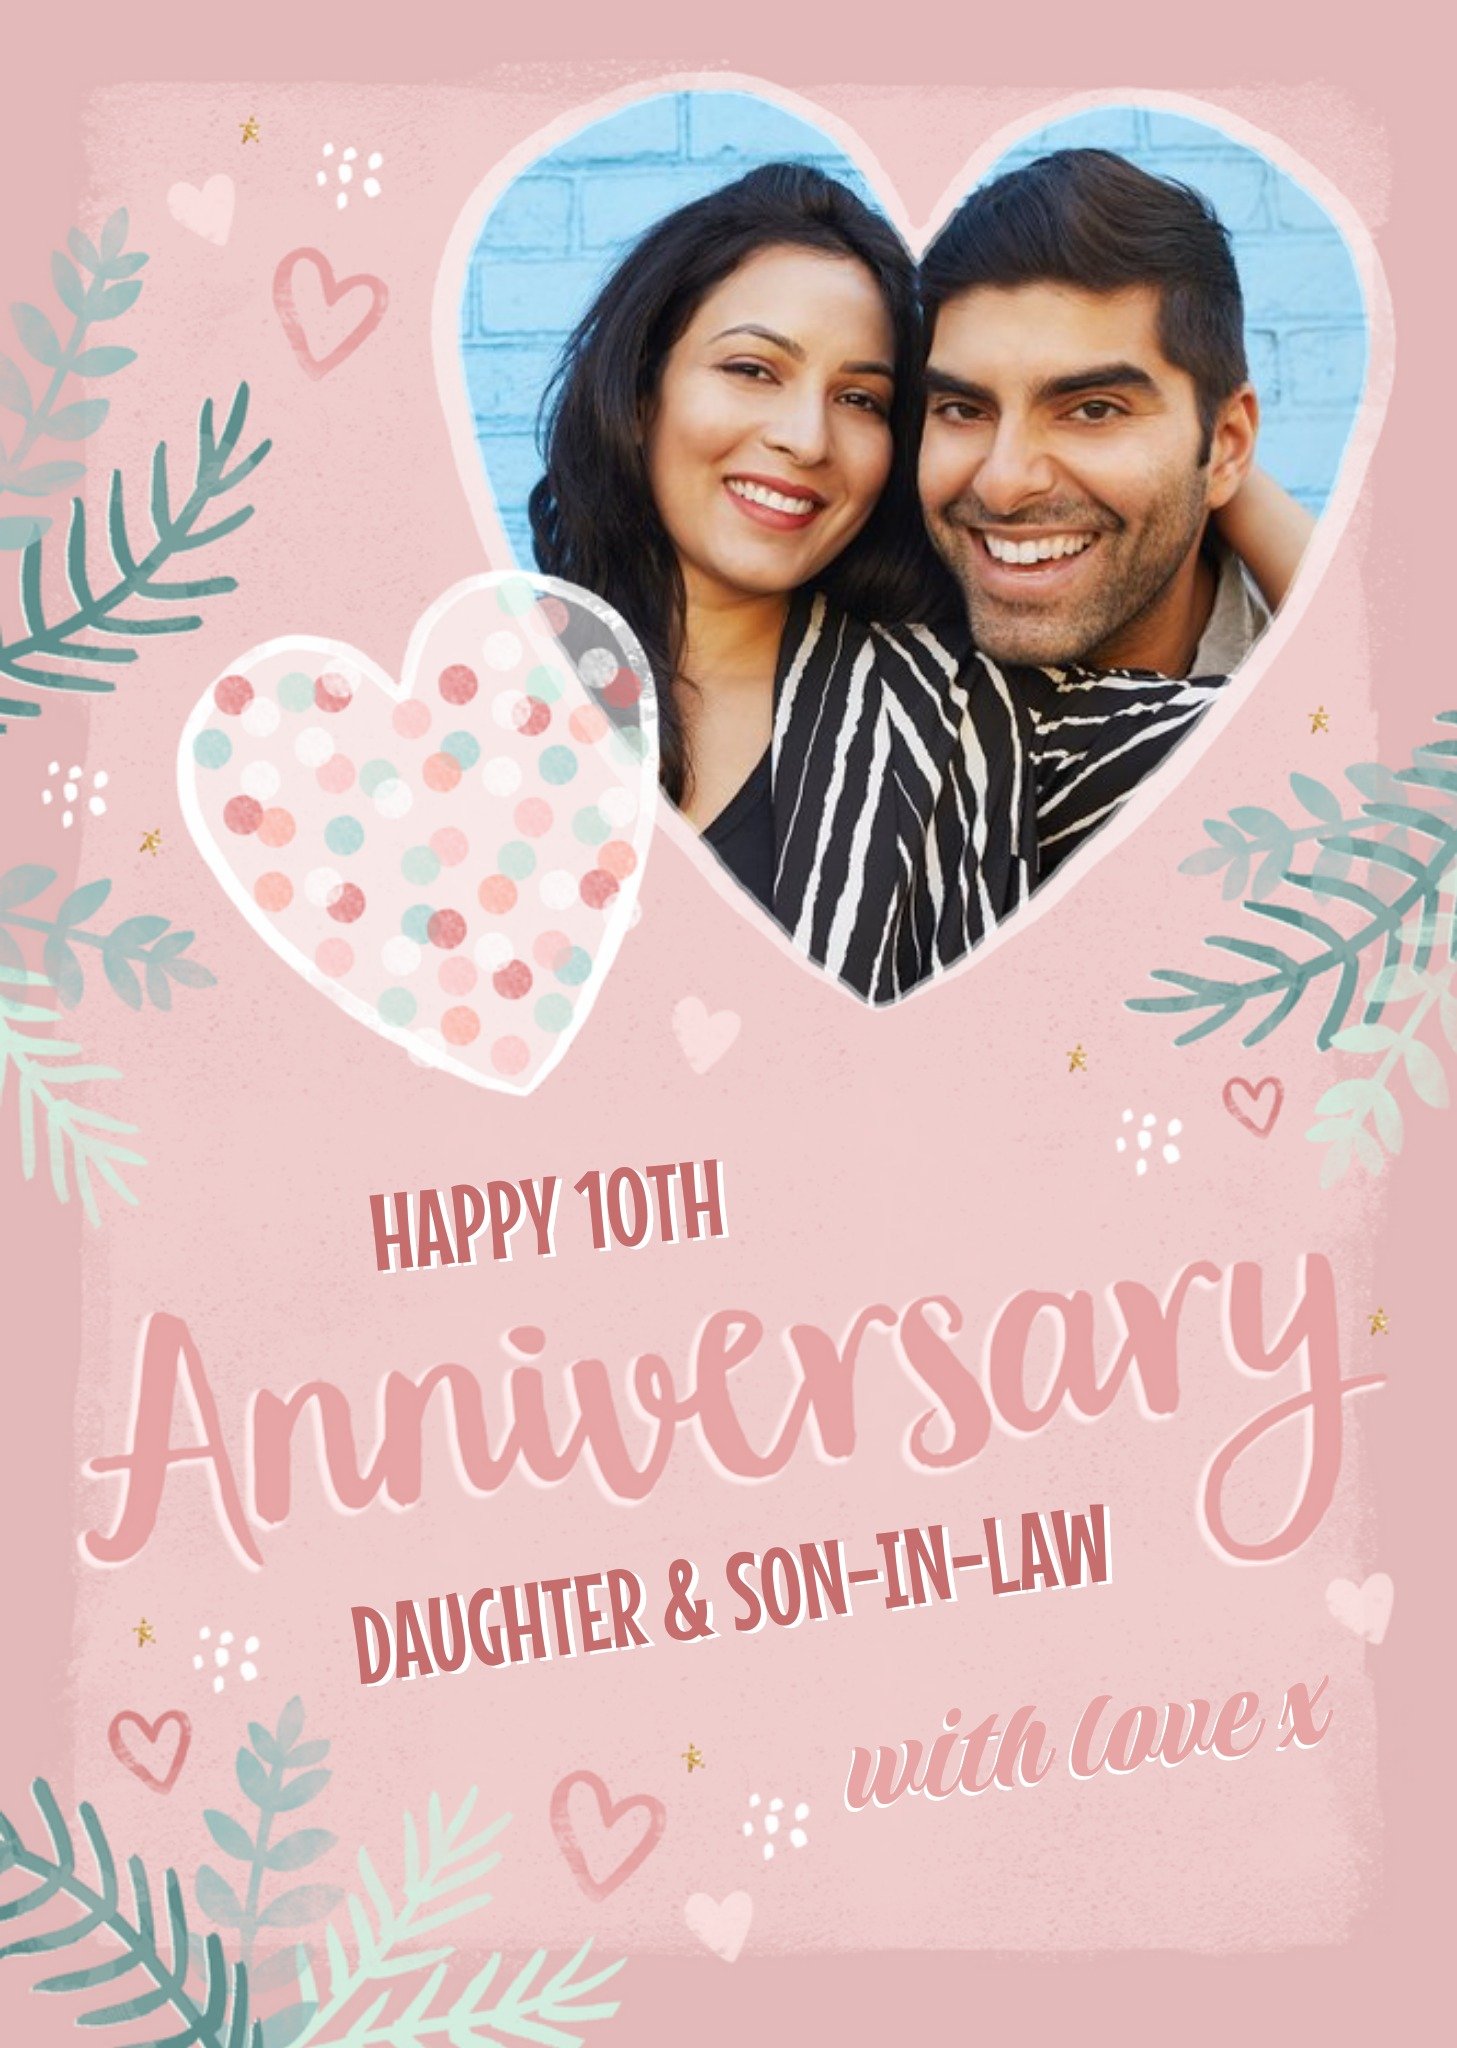 Moonpig Studio Sundae Happy 10th Anniversary Daughter And Son In Law Photo Upload Card, Large